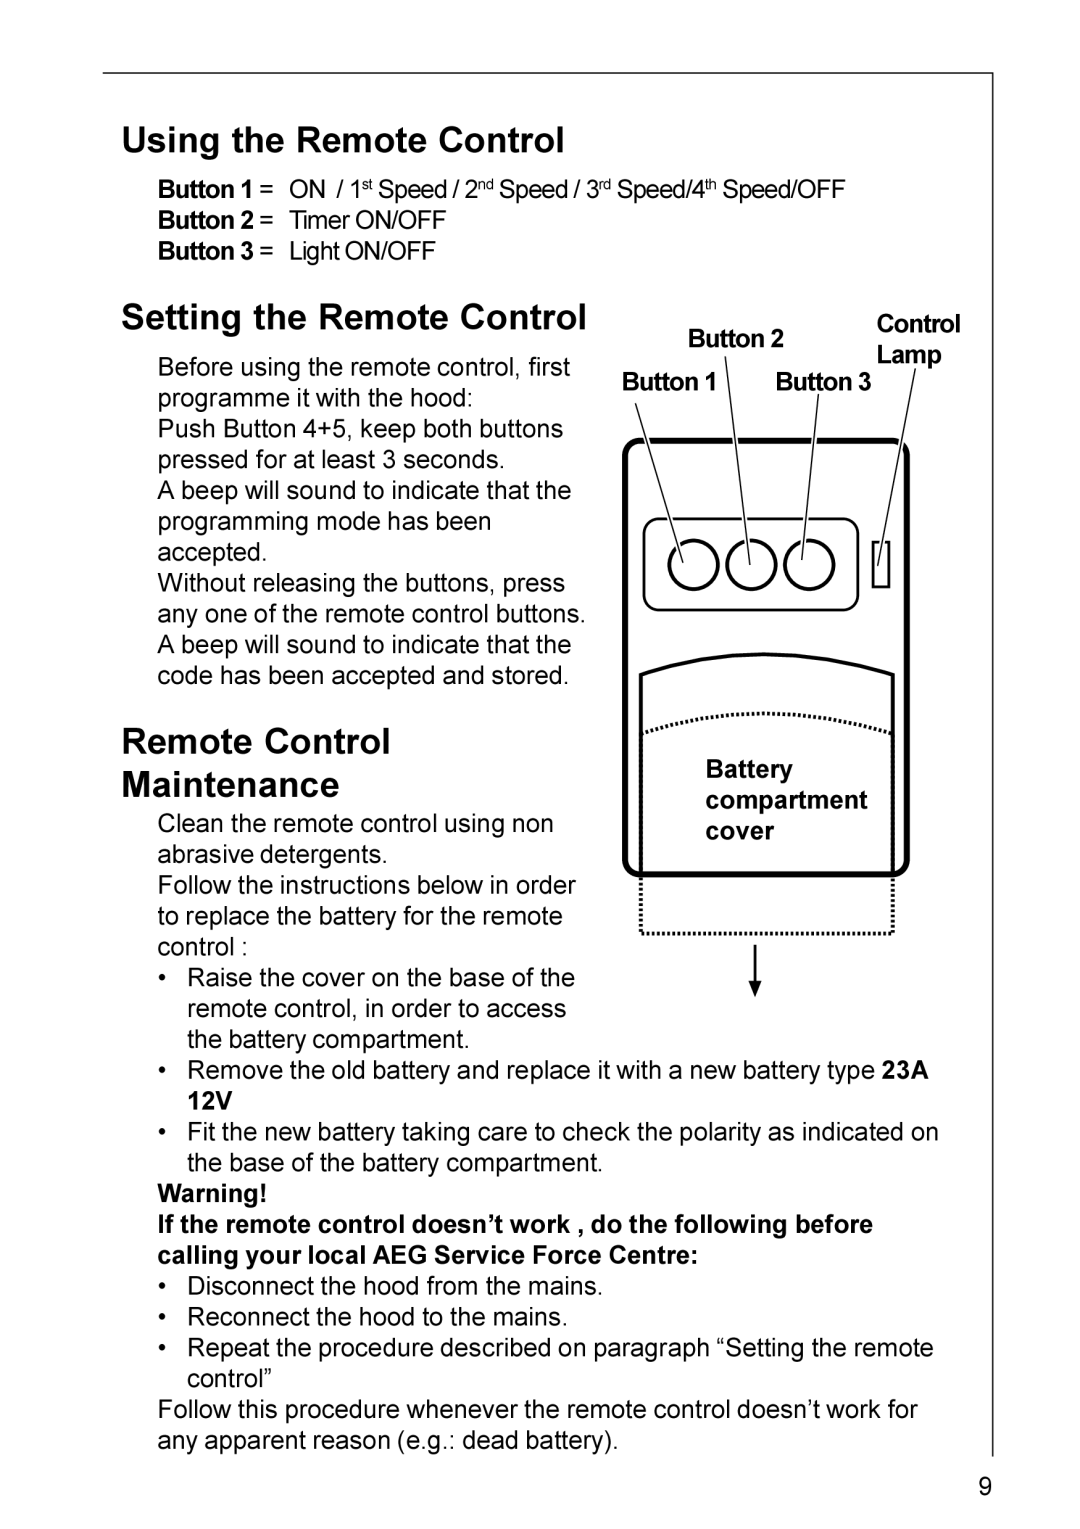 Electrolux HD 8694 installation instructions Using the Remote Control, Setting the Remote Control, Maintenance 